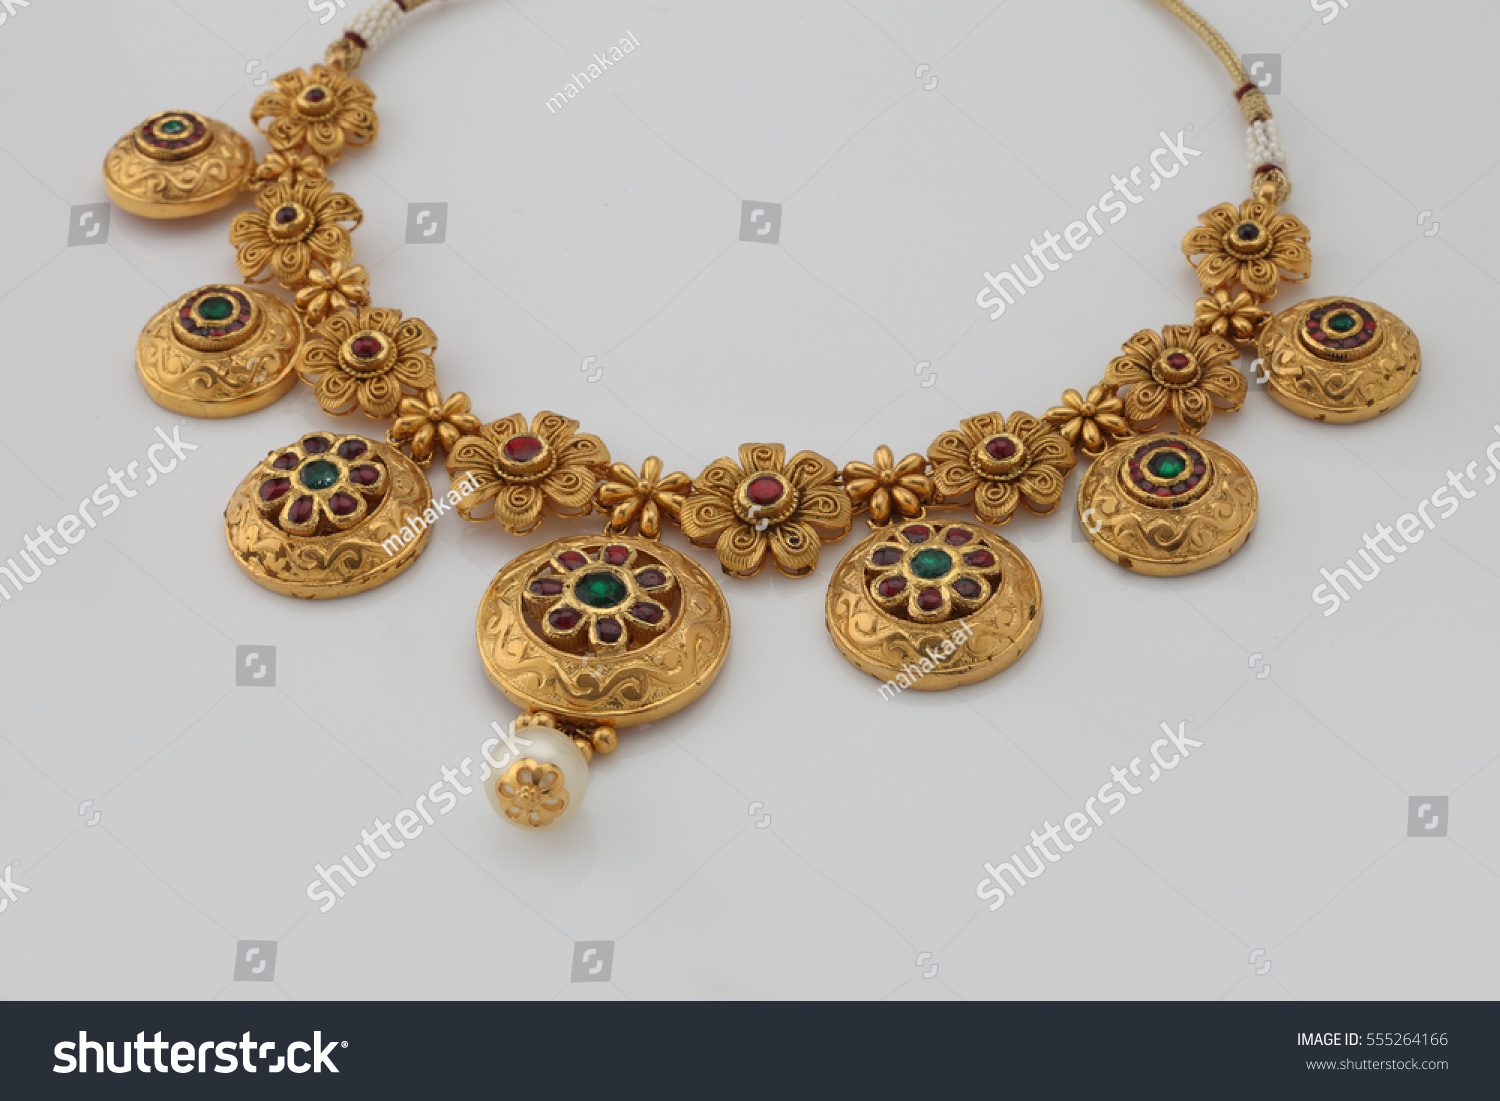 Hand Crafted Gold Necklace Jewellery On Stock Photo 555264166 ...